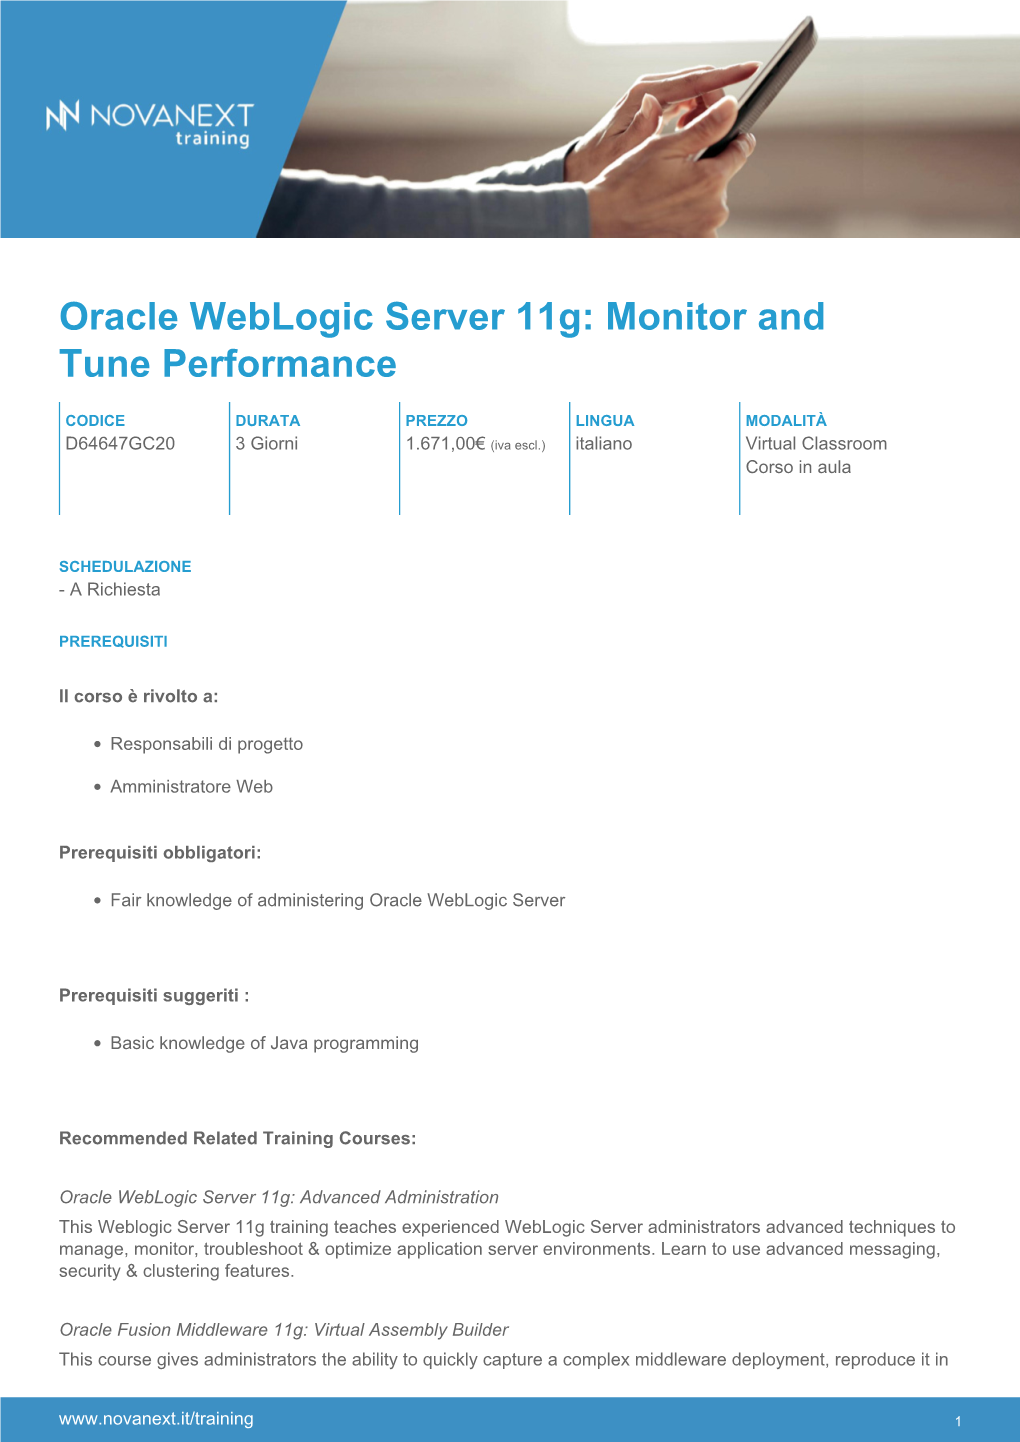 Oracle Weblogic Server 11G: Monitor and Tune Performance